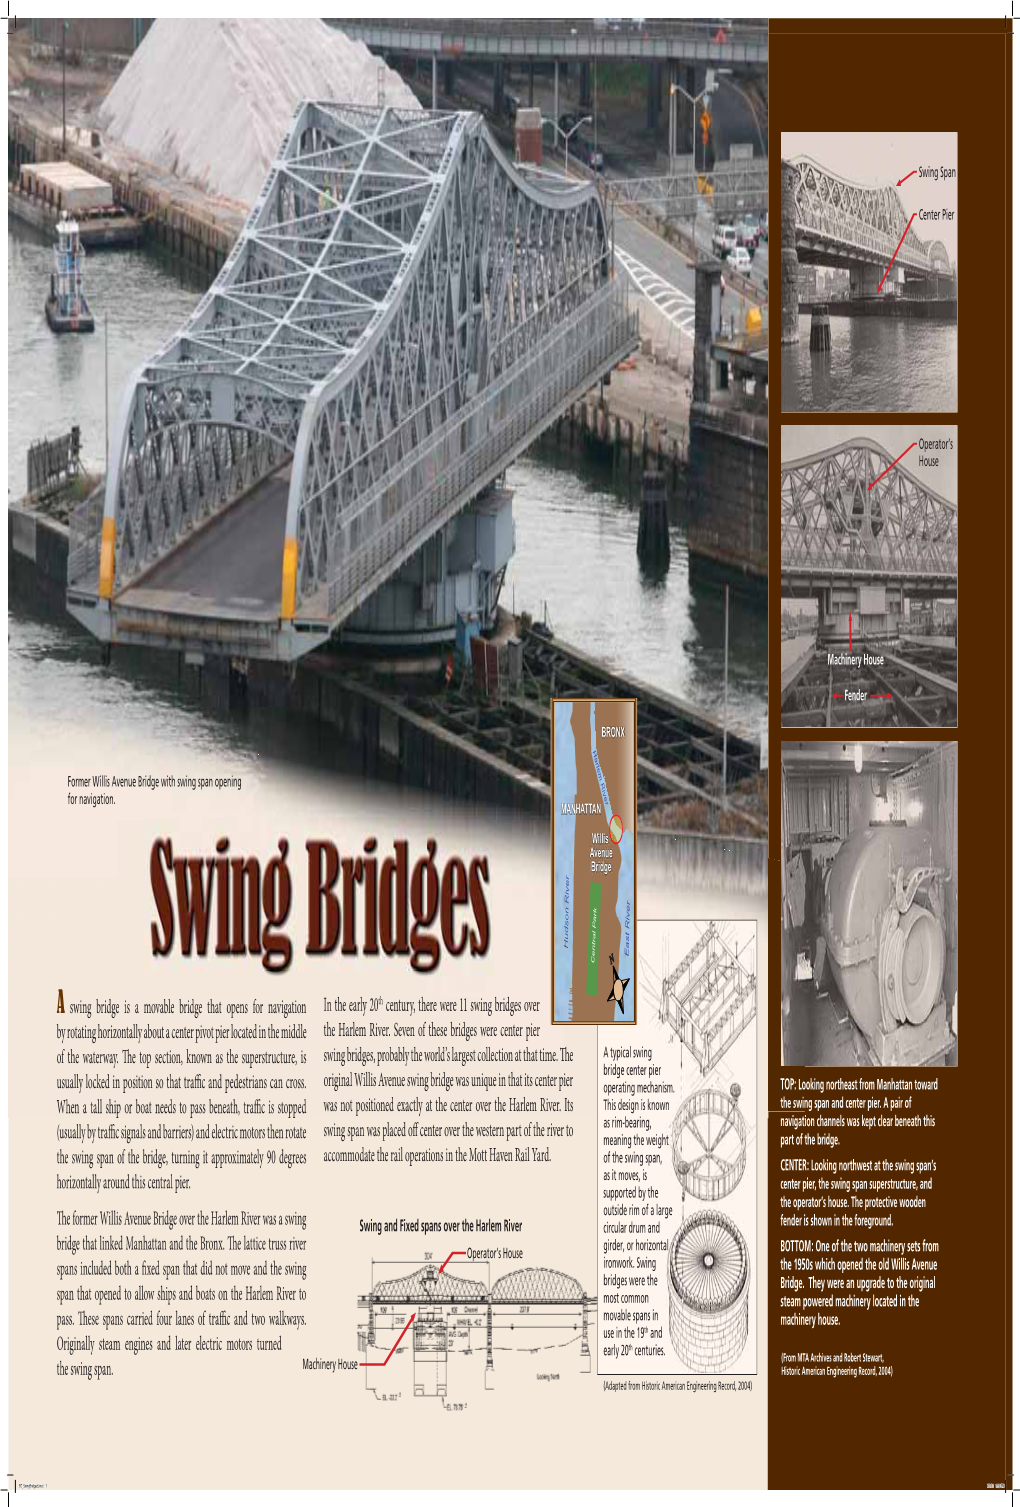 A Swing Bridge Is a Movable Bridge That Opens for Navigation by Rotating